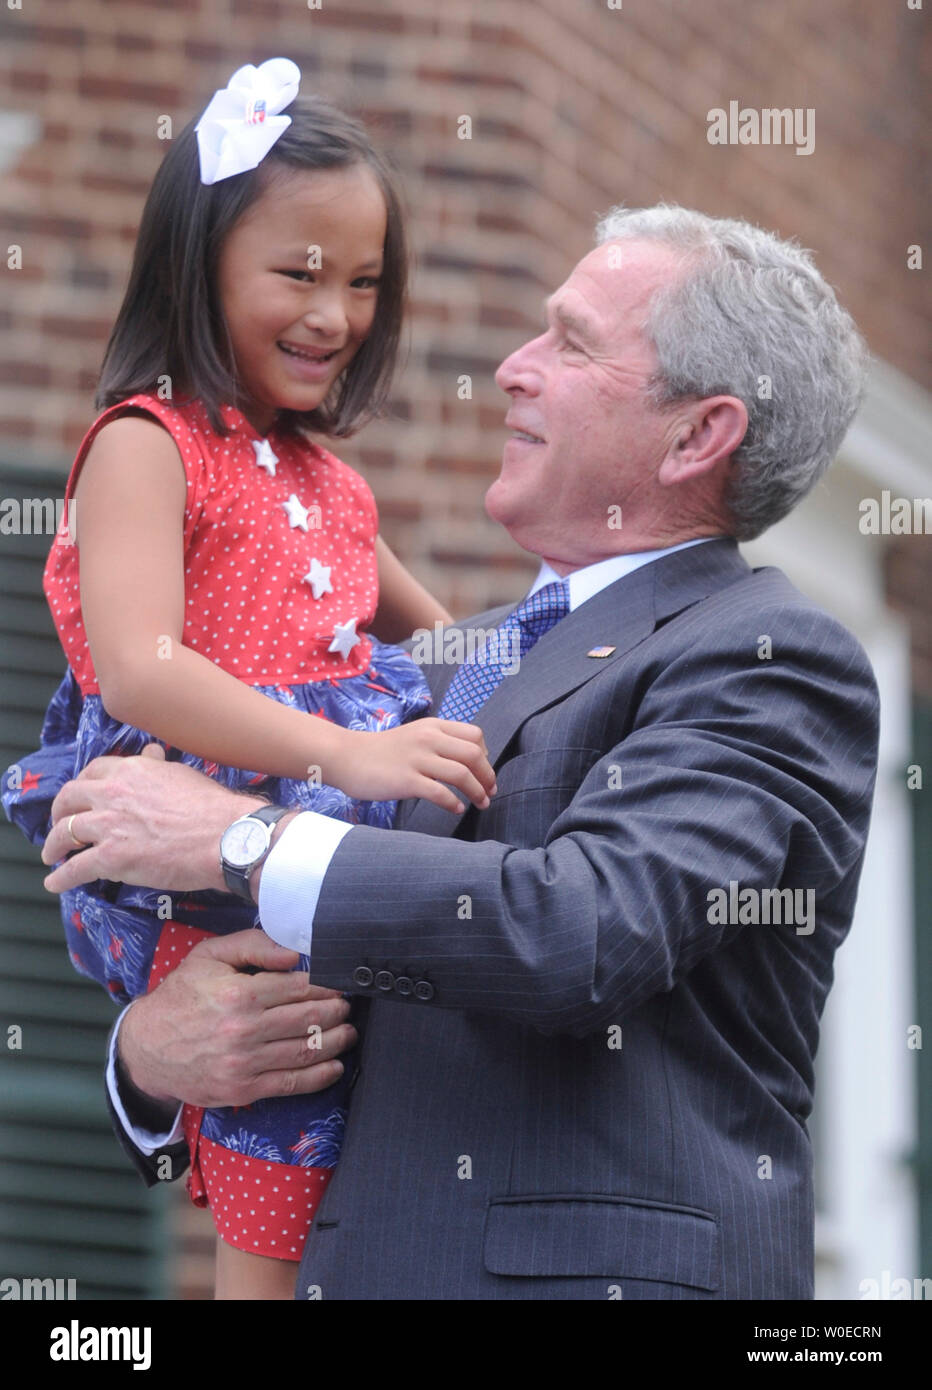 U.S. President George W. Bush holds newly naturalized United States citizen, Julie White Freeman, during an Independence Day naturalization ceremony at Monticello, the home of Thomas Jefferson, in  Charlottesville, Virginia on July 4, 2008. 72 foreign nationals were sworn-in as United States citizens. (UPI Photo/Kevin Dietsch) Stock Photo